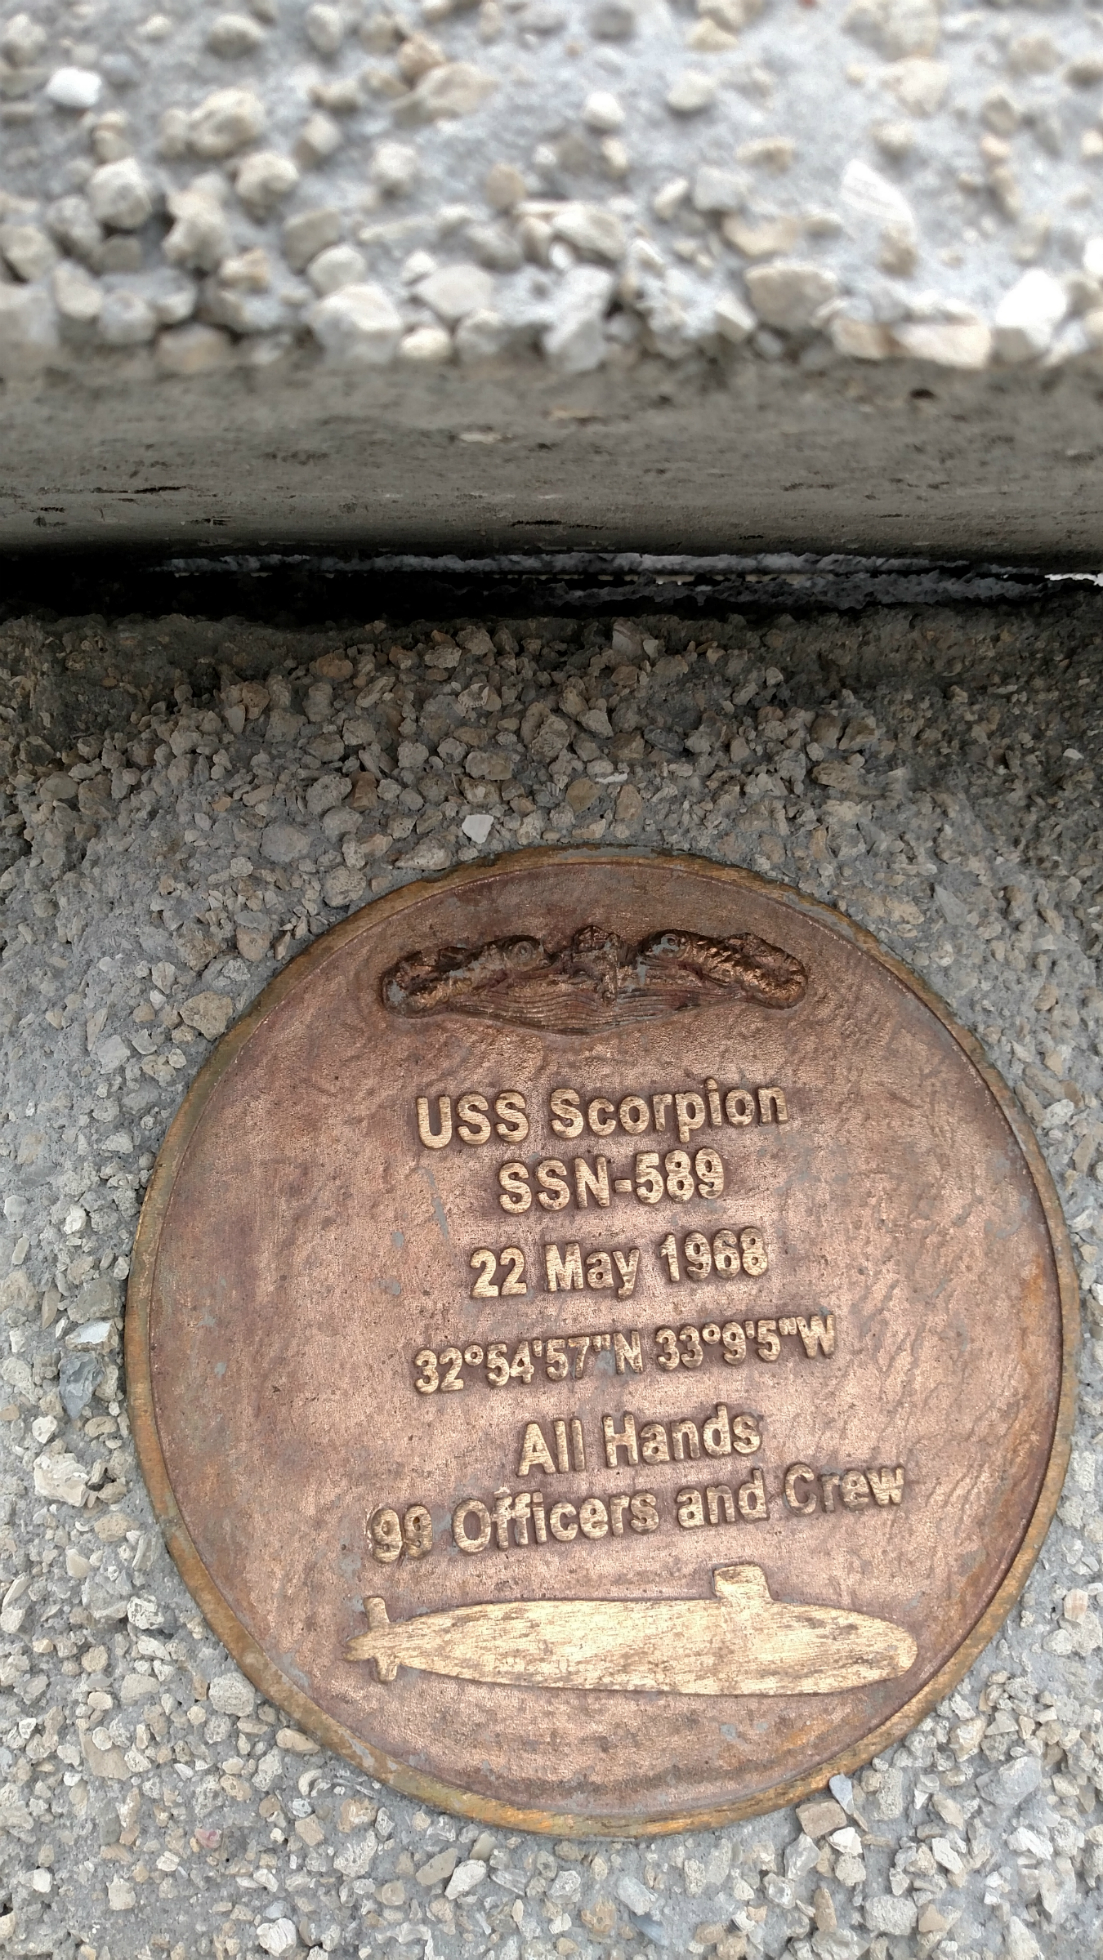 The plaque recognizing the USS Scorpion to be displayed in the On Eternal Patrol Memorial Reef.